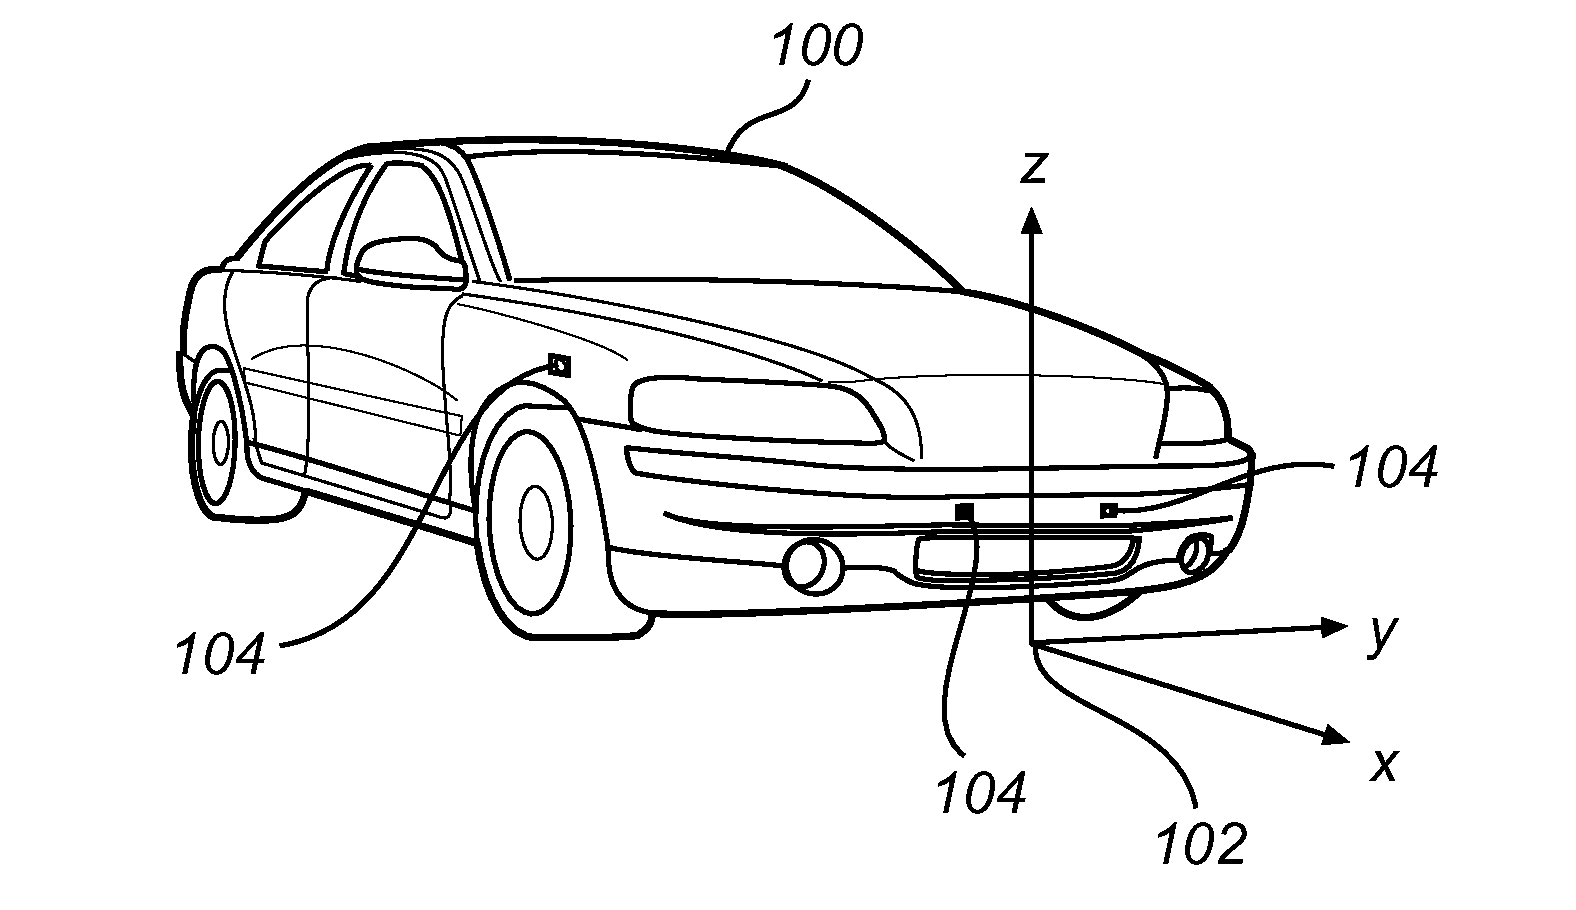 System and method for improving a performance estimation of an operator of a vehicle